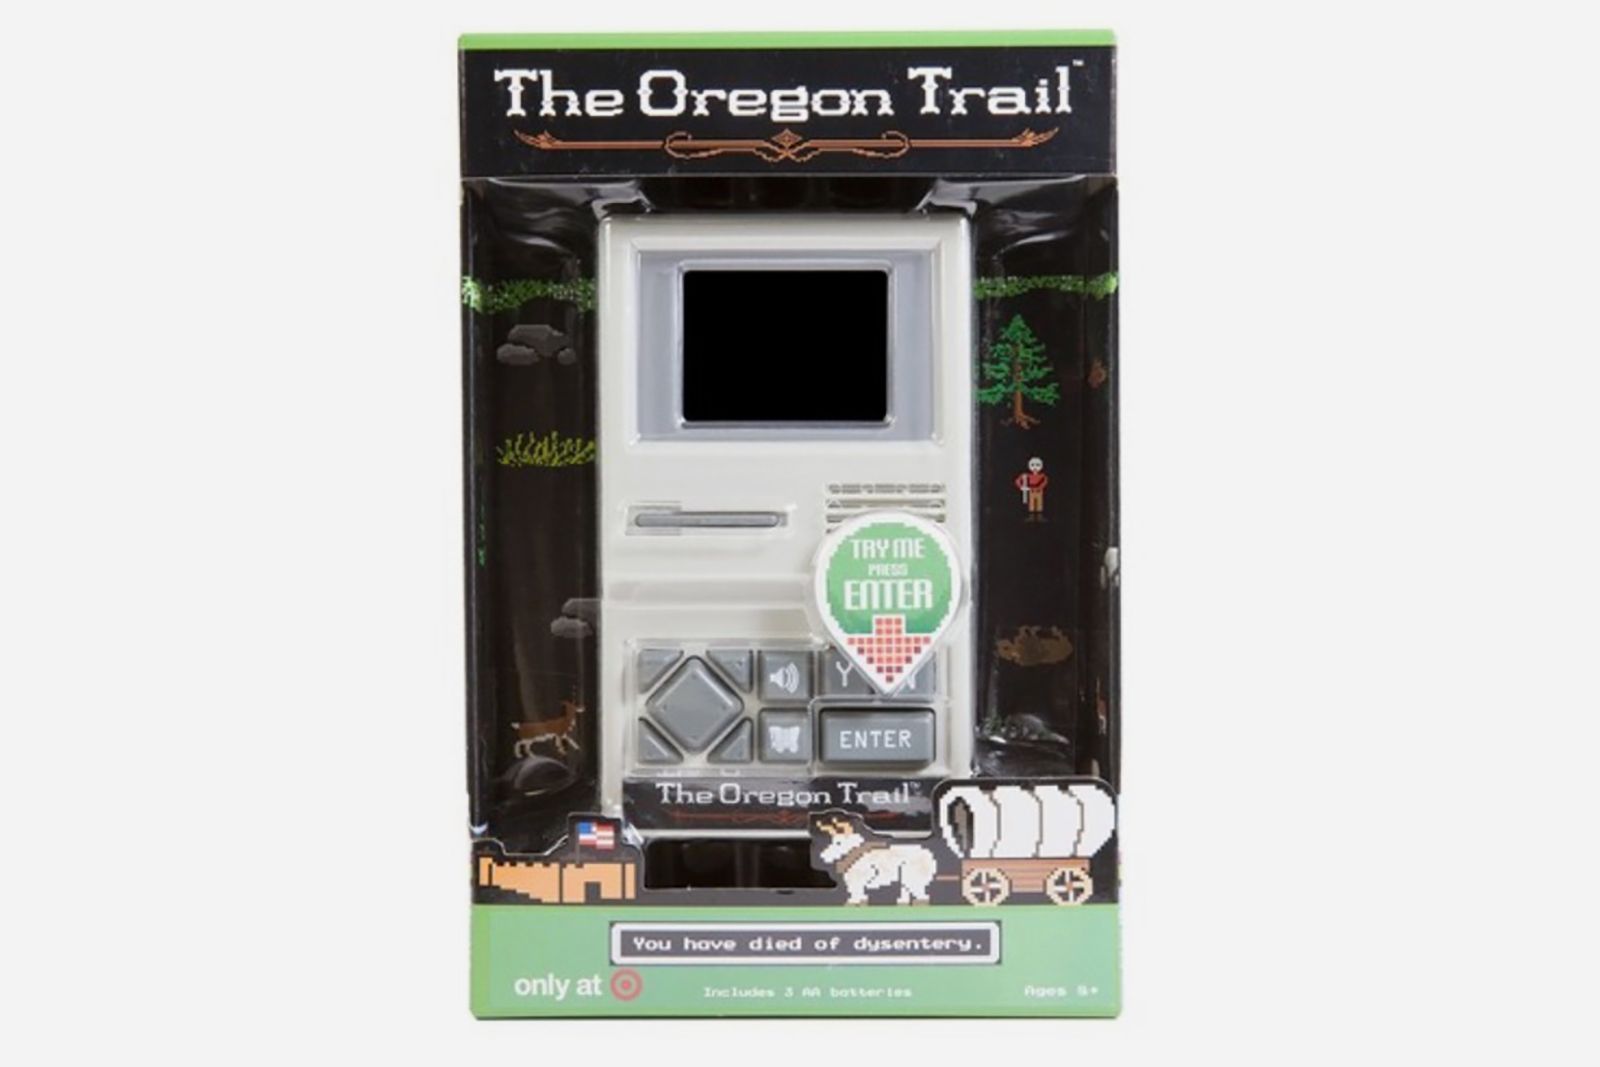 Oregon Trail is a handheld now so you can chuck it when you die from dysentery image 1